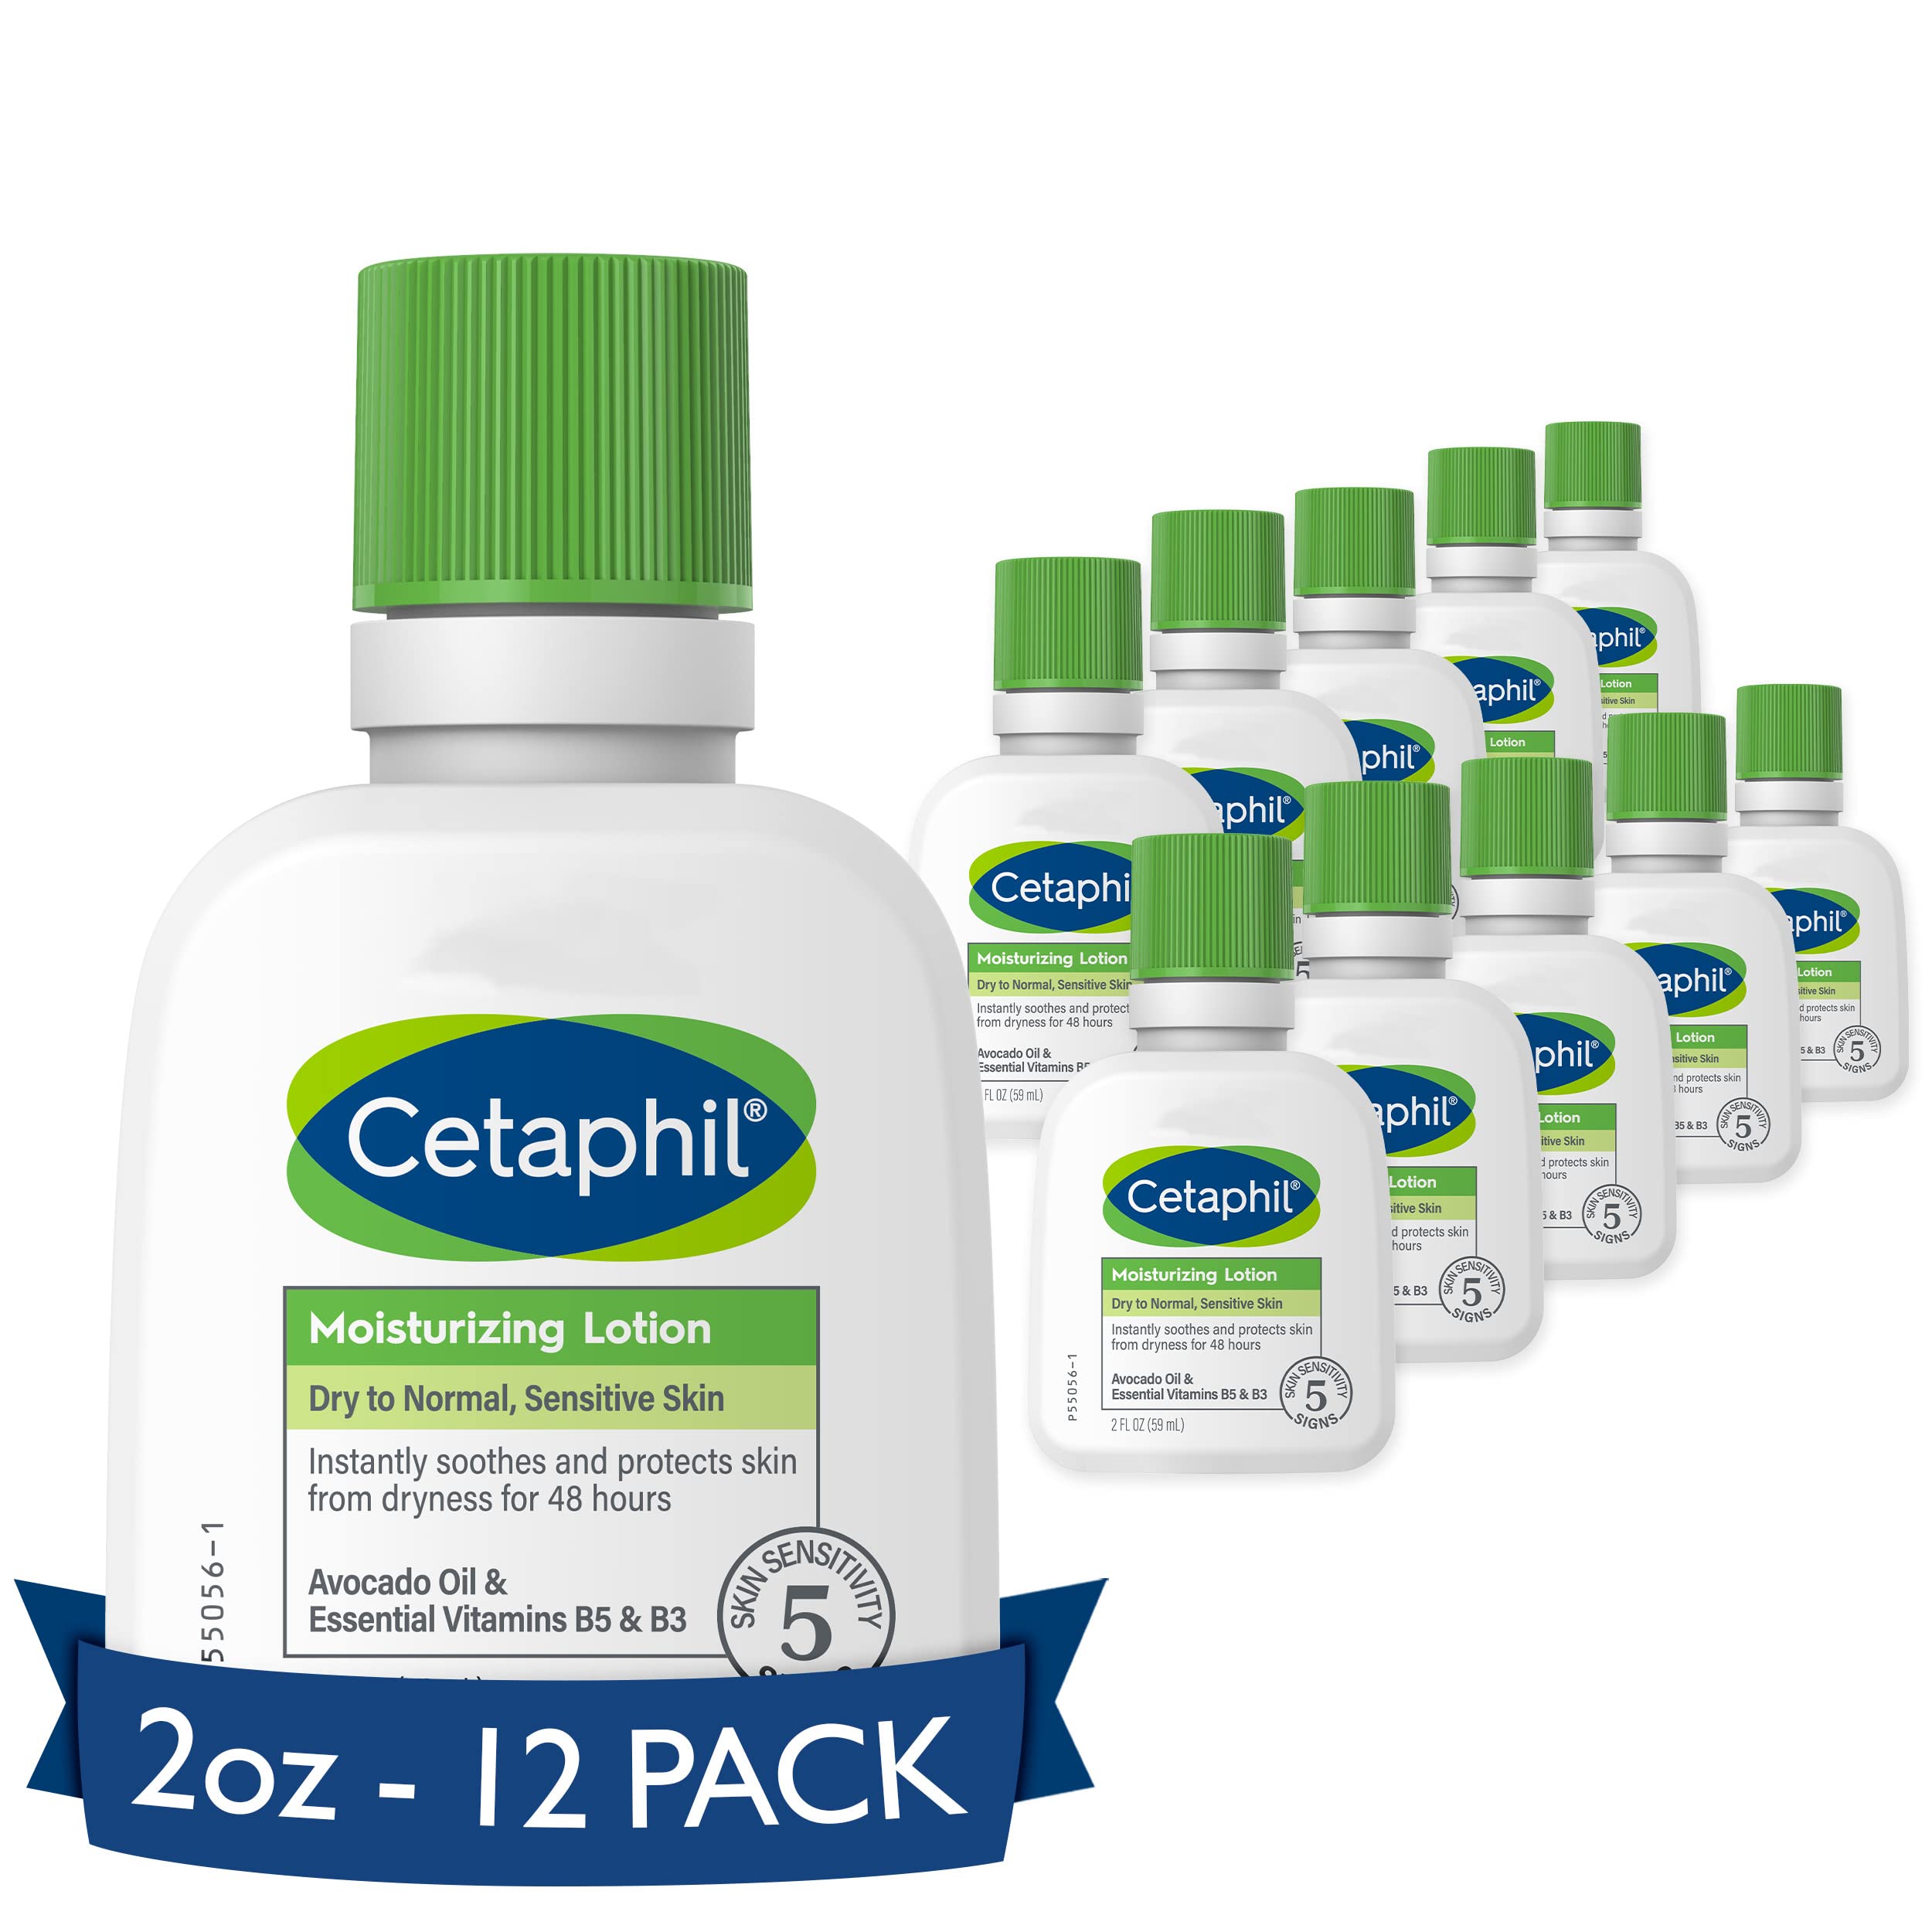 Cetaphil Body Moisturizer, Hydrating Moisturizing Lotion for All Skin Types, Suitable for Sensitive Skin, NEW 2 oz Pack of 12, Fragrance Free, Hypoallergenic, Non-Comedogenic